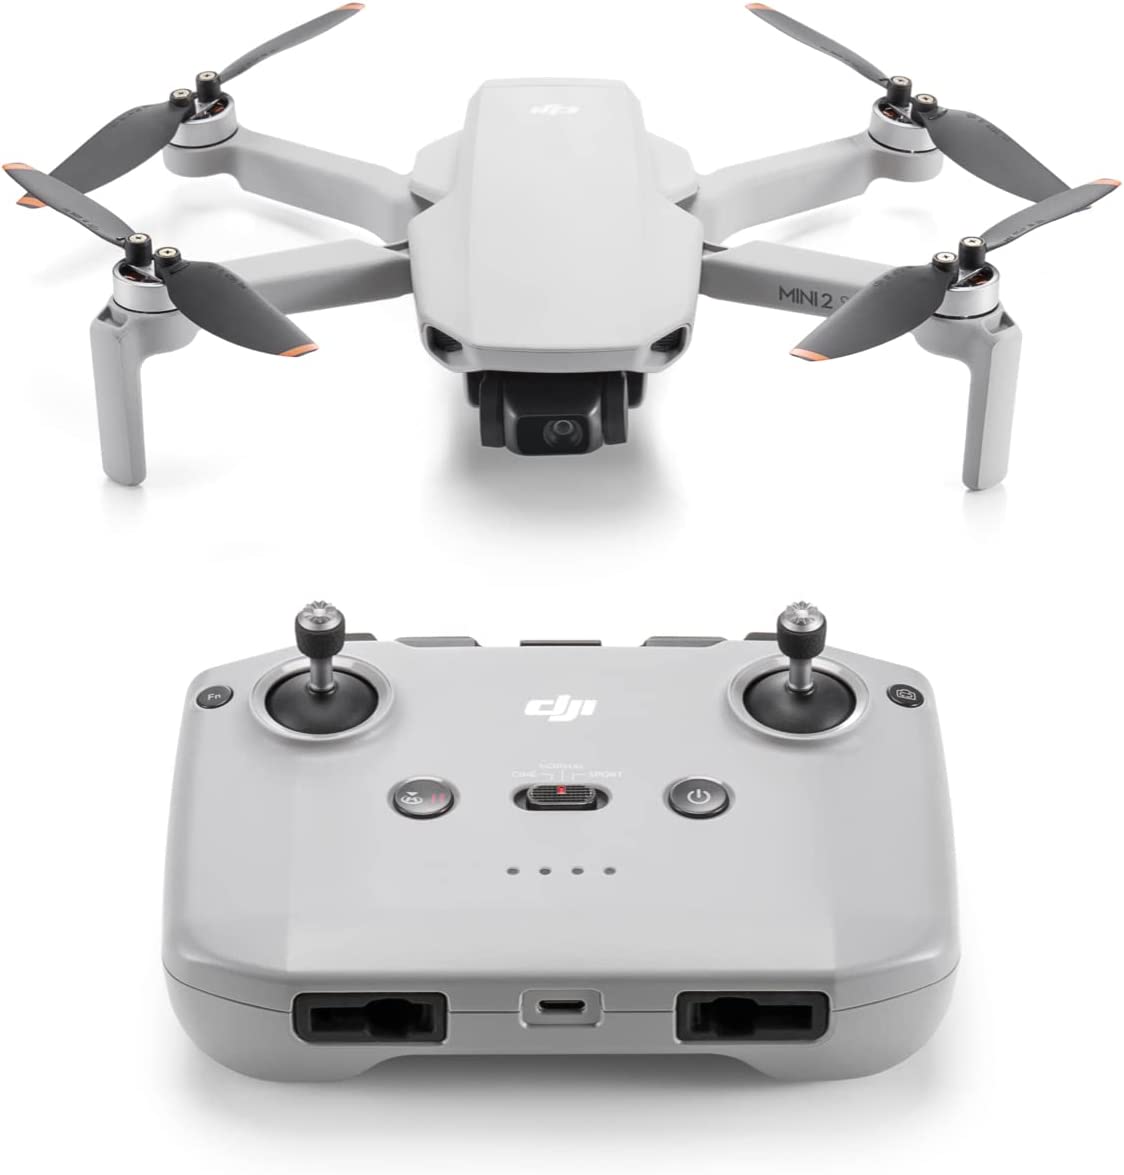 DJI Drone - Mini 2 SE, Foldable Lightweight Mini Drone with QHD Video, 10km Video Transmission, 31-min Flight Time, Under 249 g, Return to Home, Automatic Pro Shots, Drone with Camera for Beginners